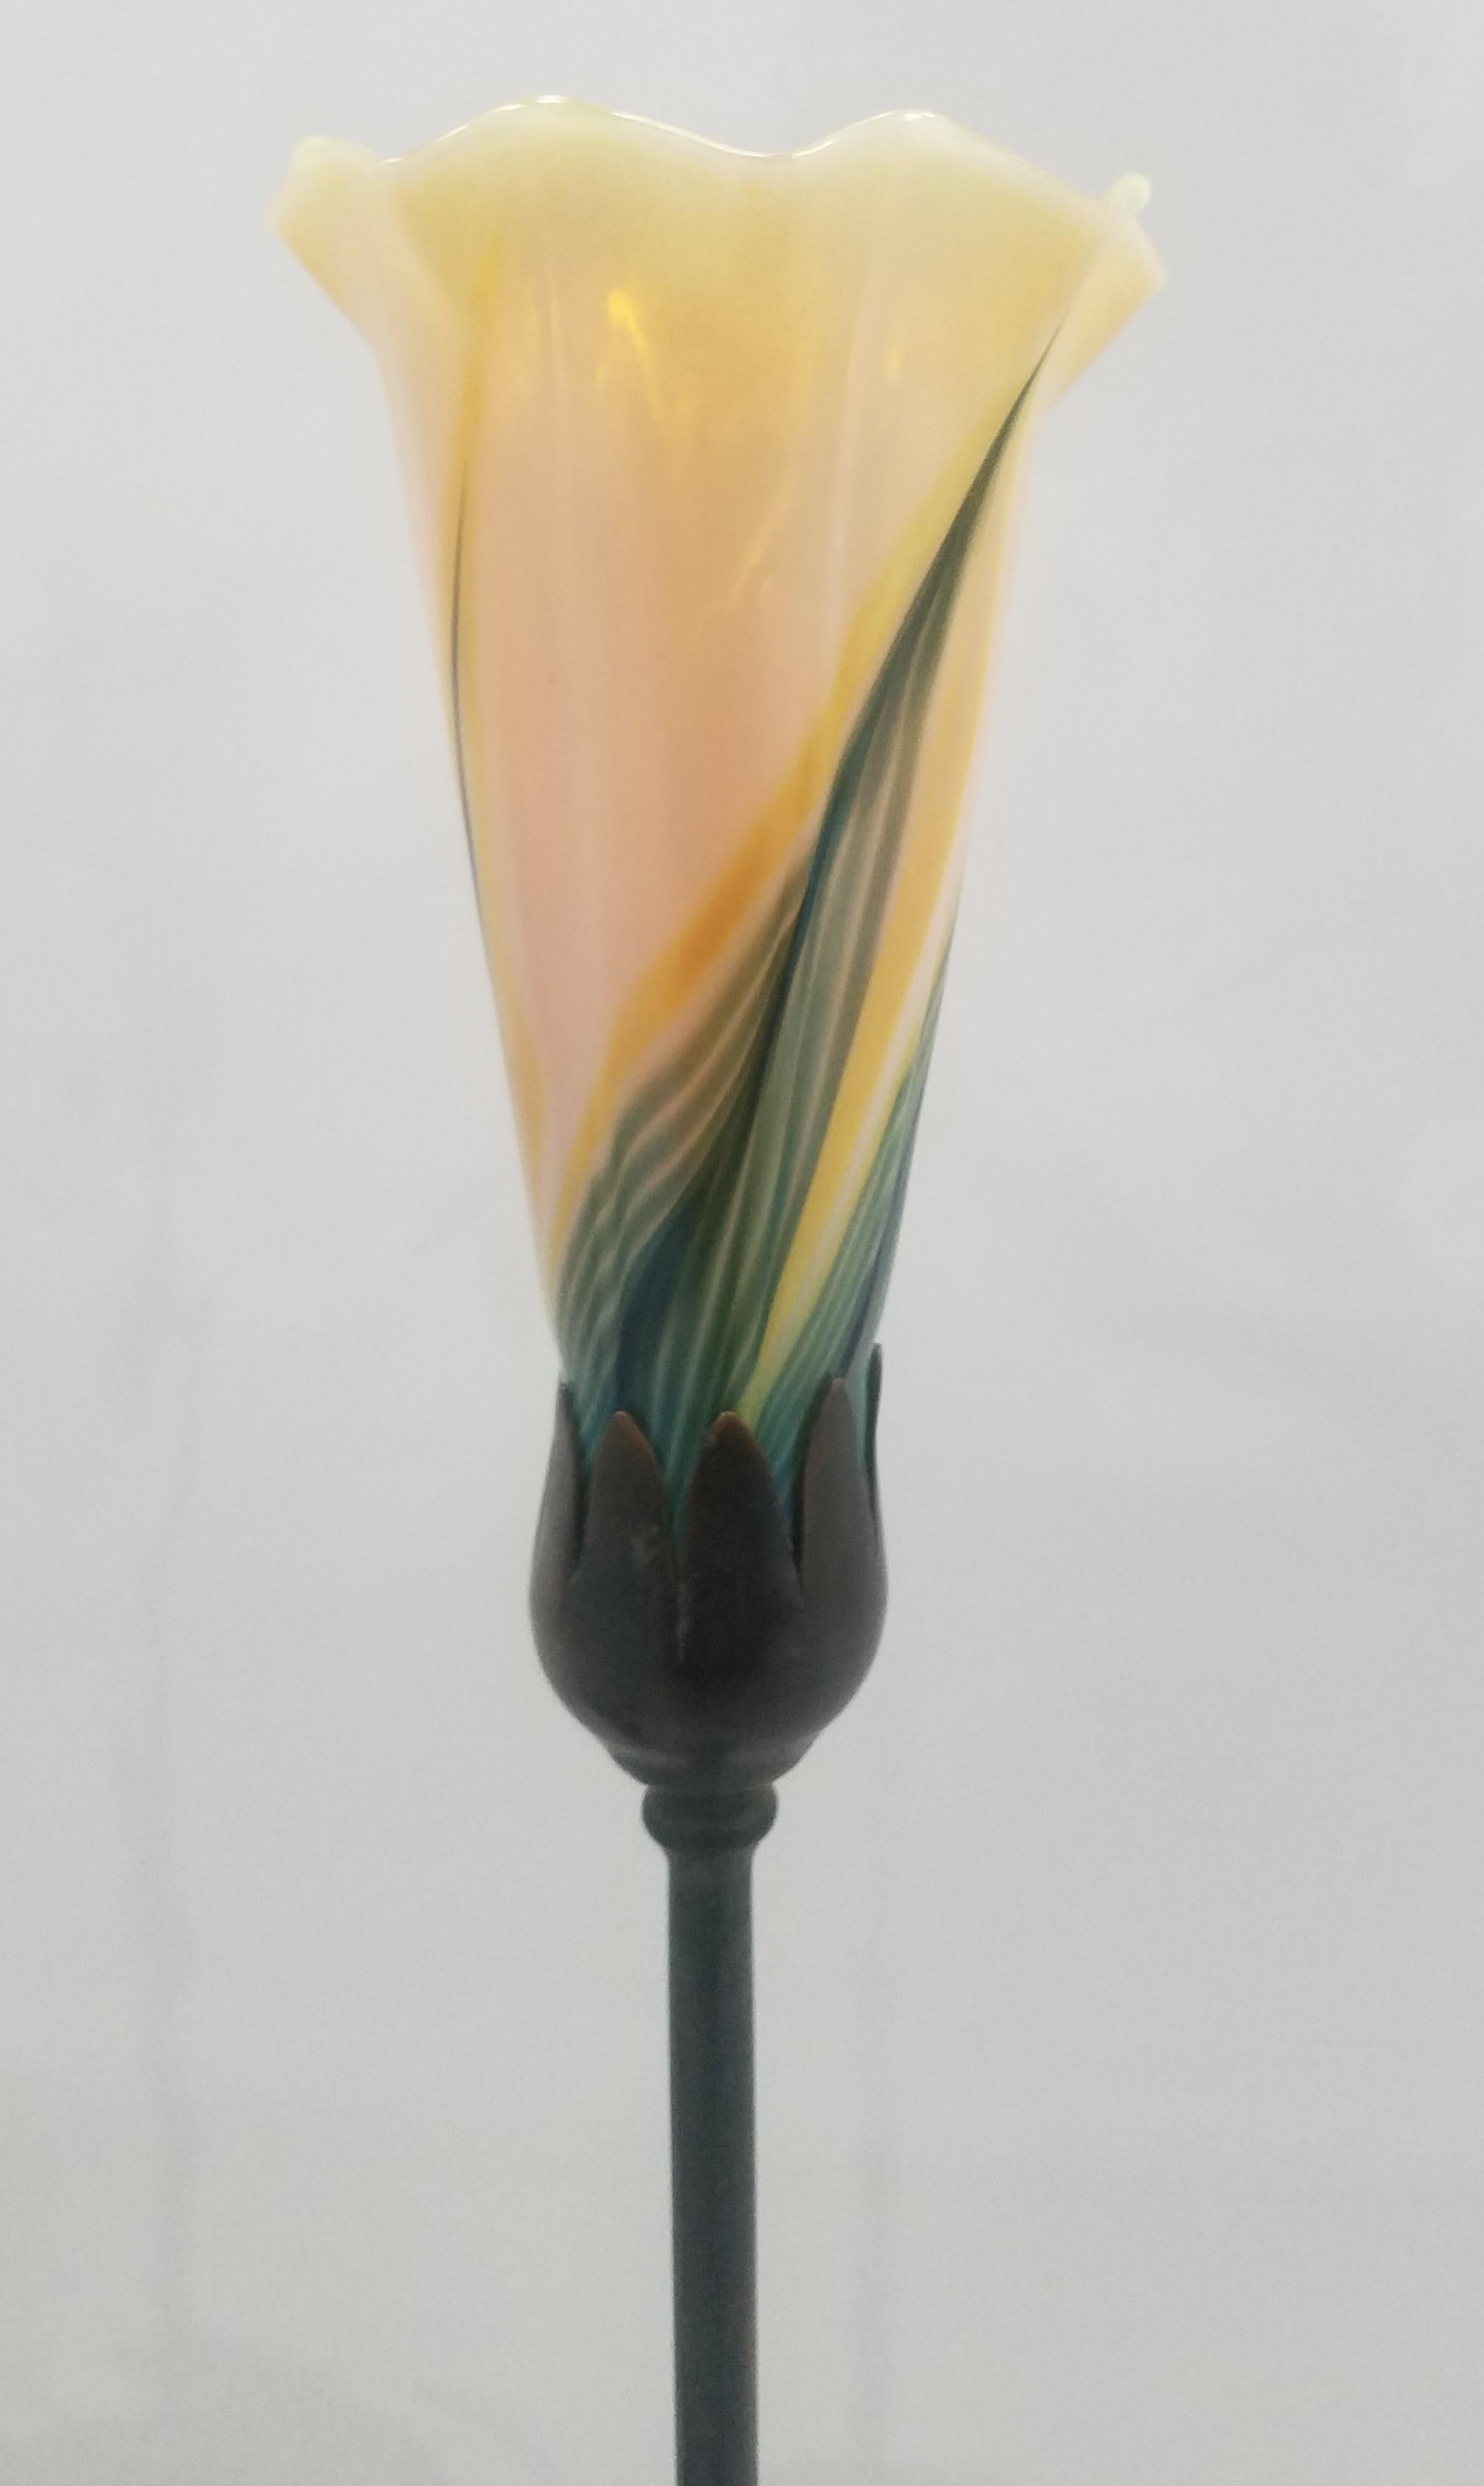 Pair of Aurora Studios Bronze and art glass table lamps

Art Nouveau style iridescent tulip motif art glass in manner of Tiffany Studios

Base 4.5